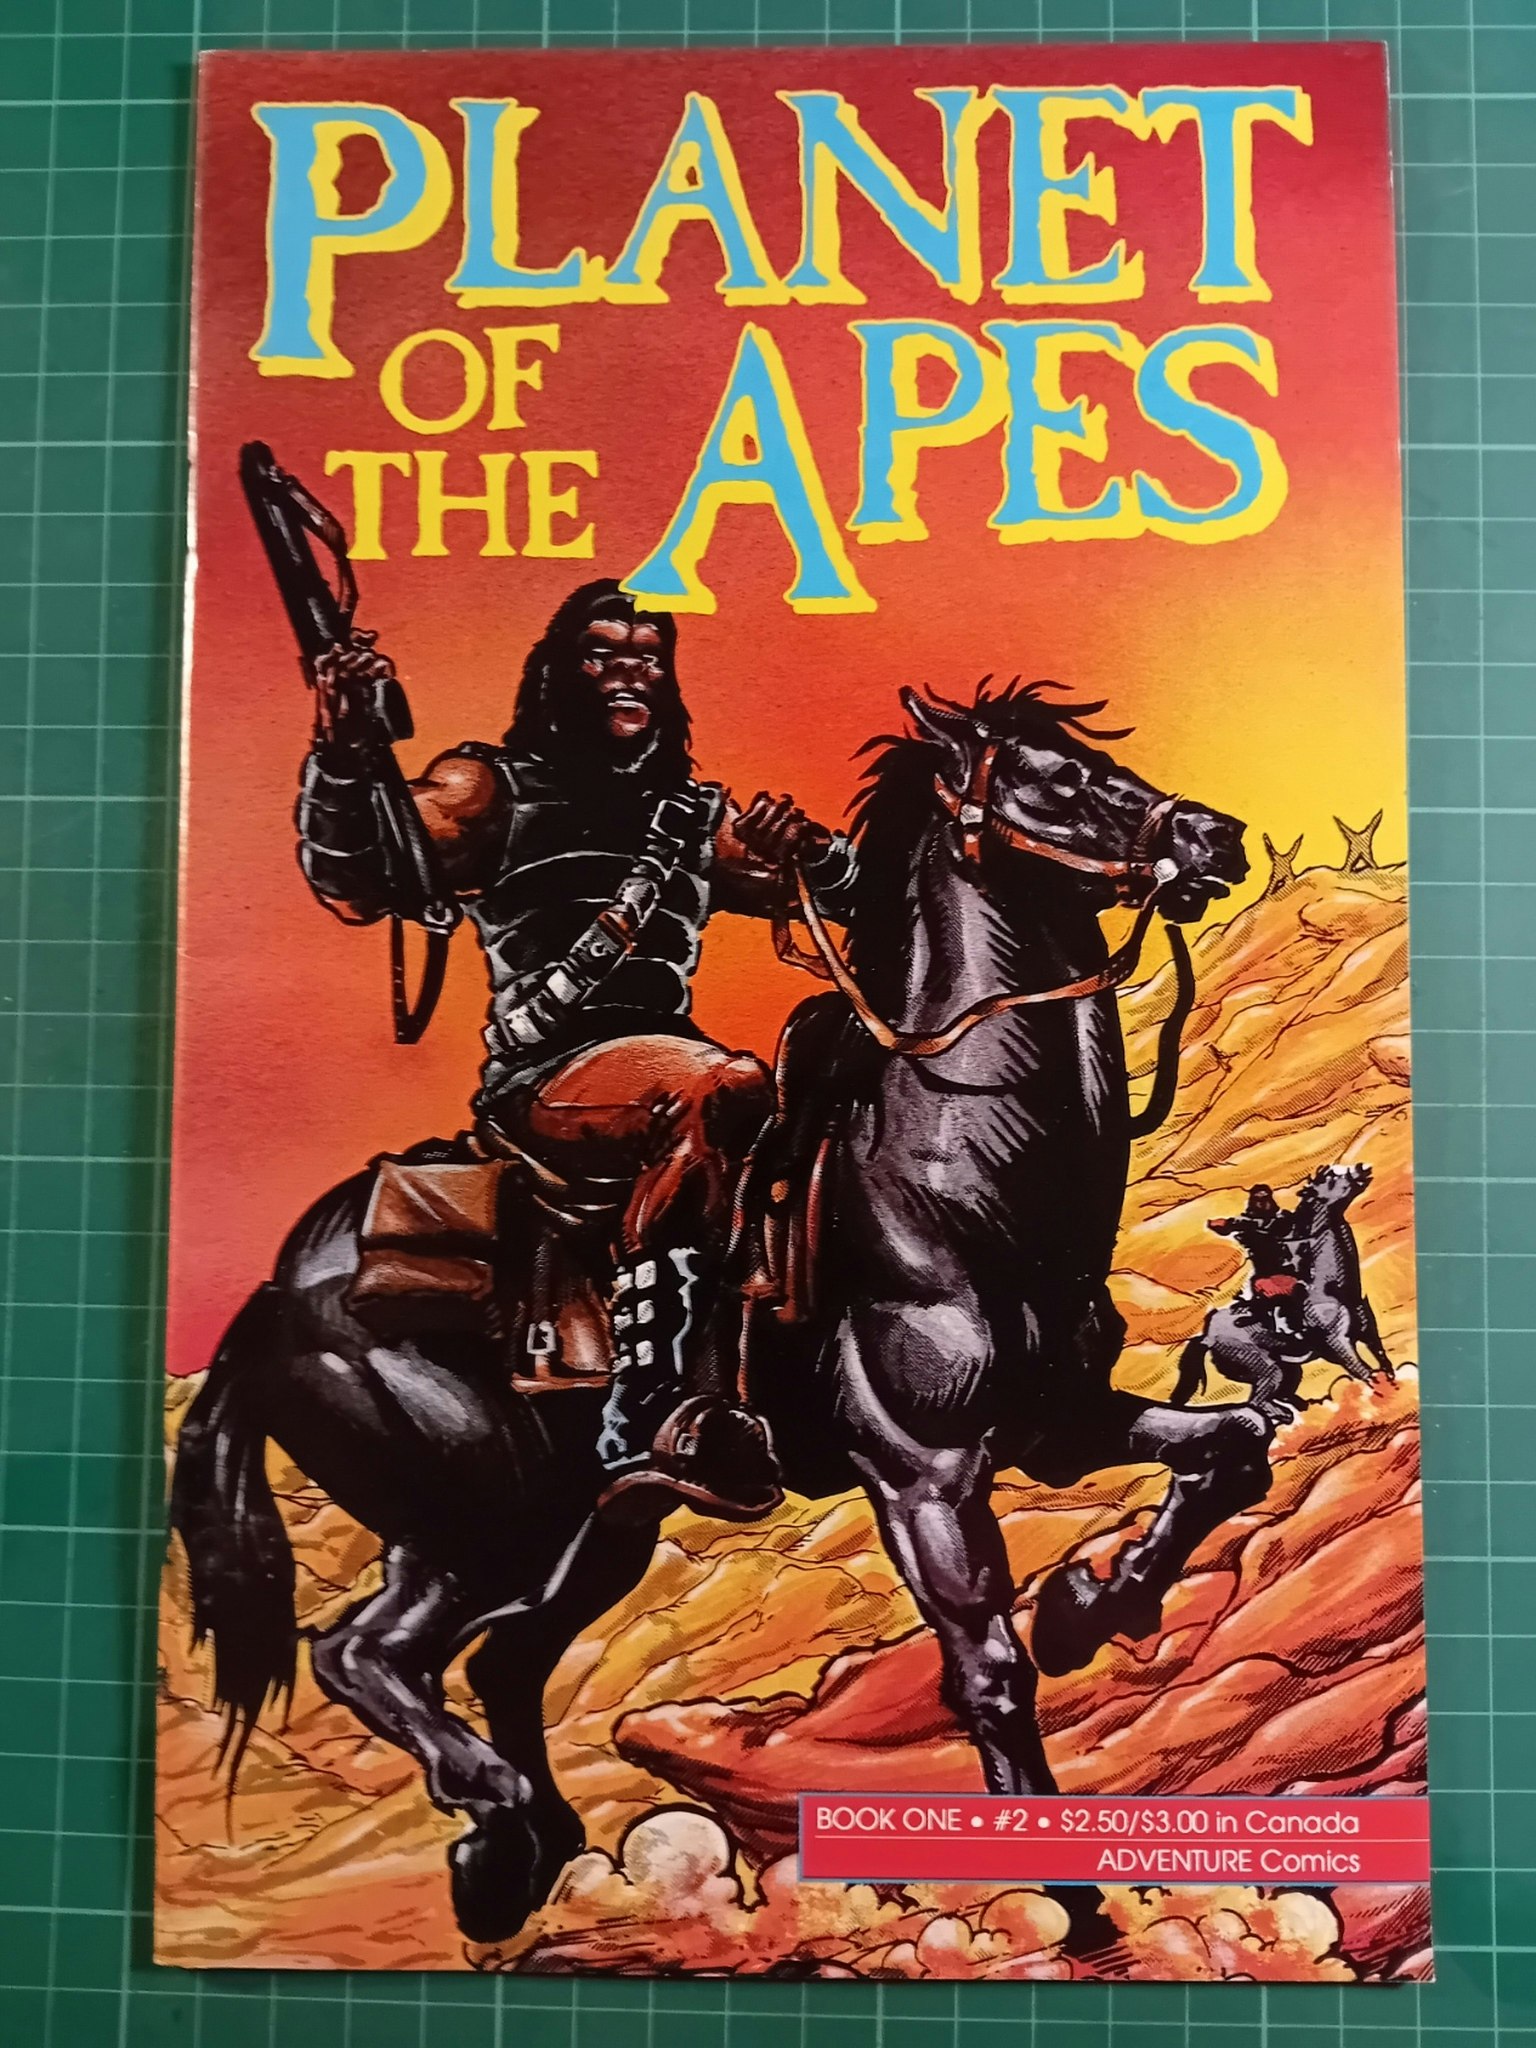 Planet of the apes #02